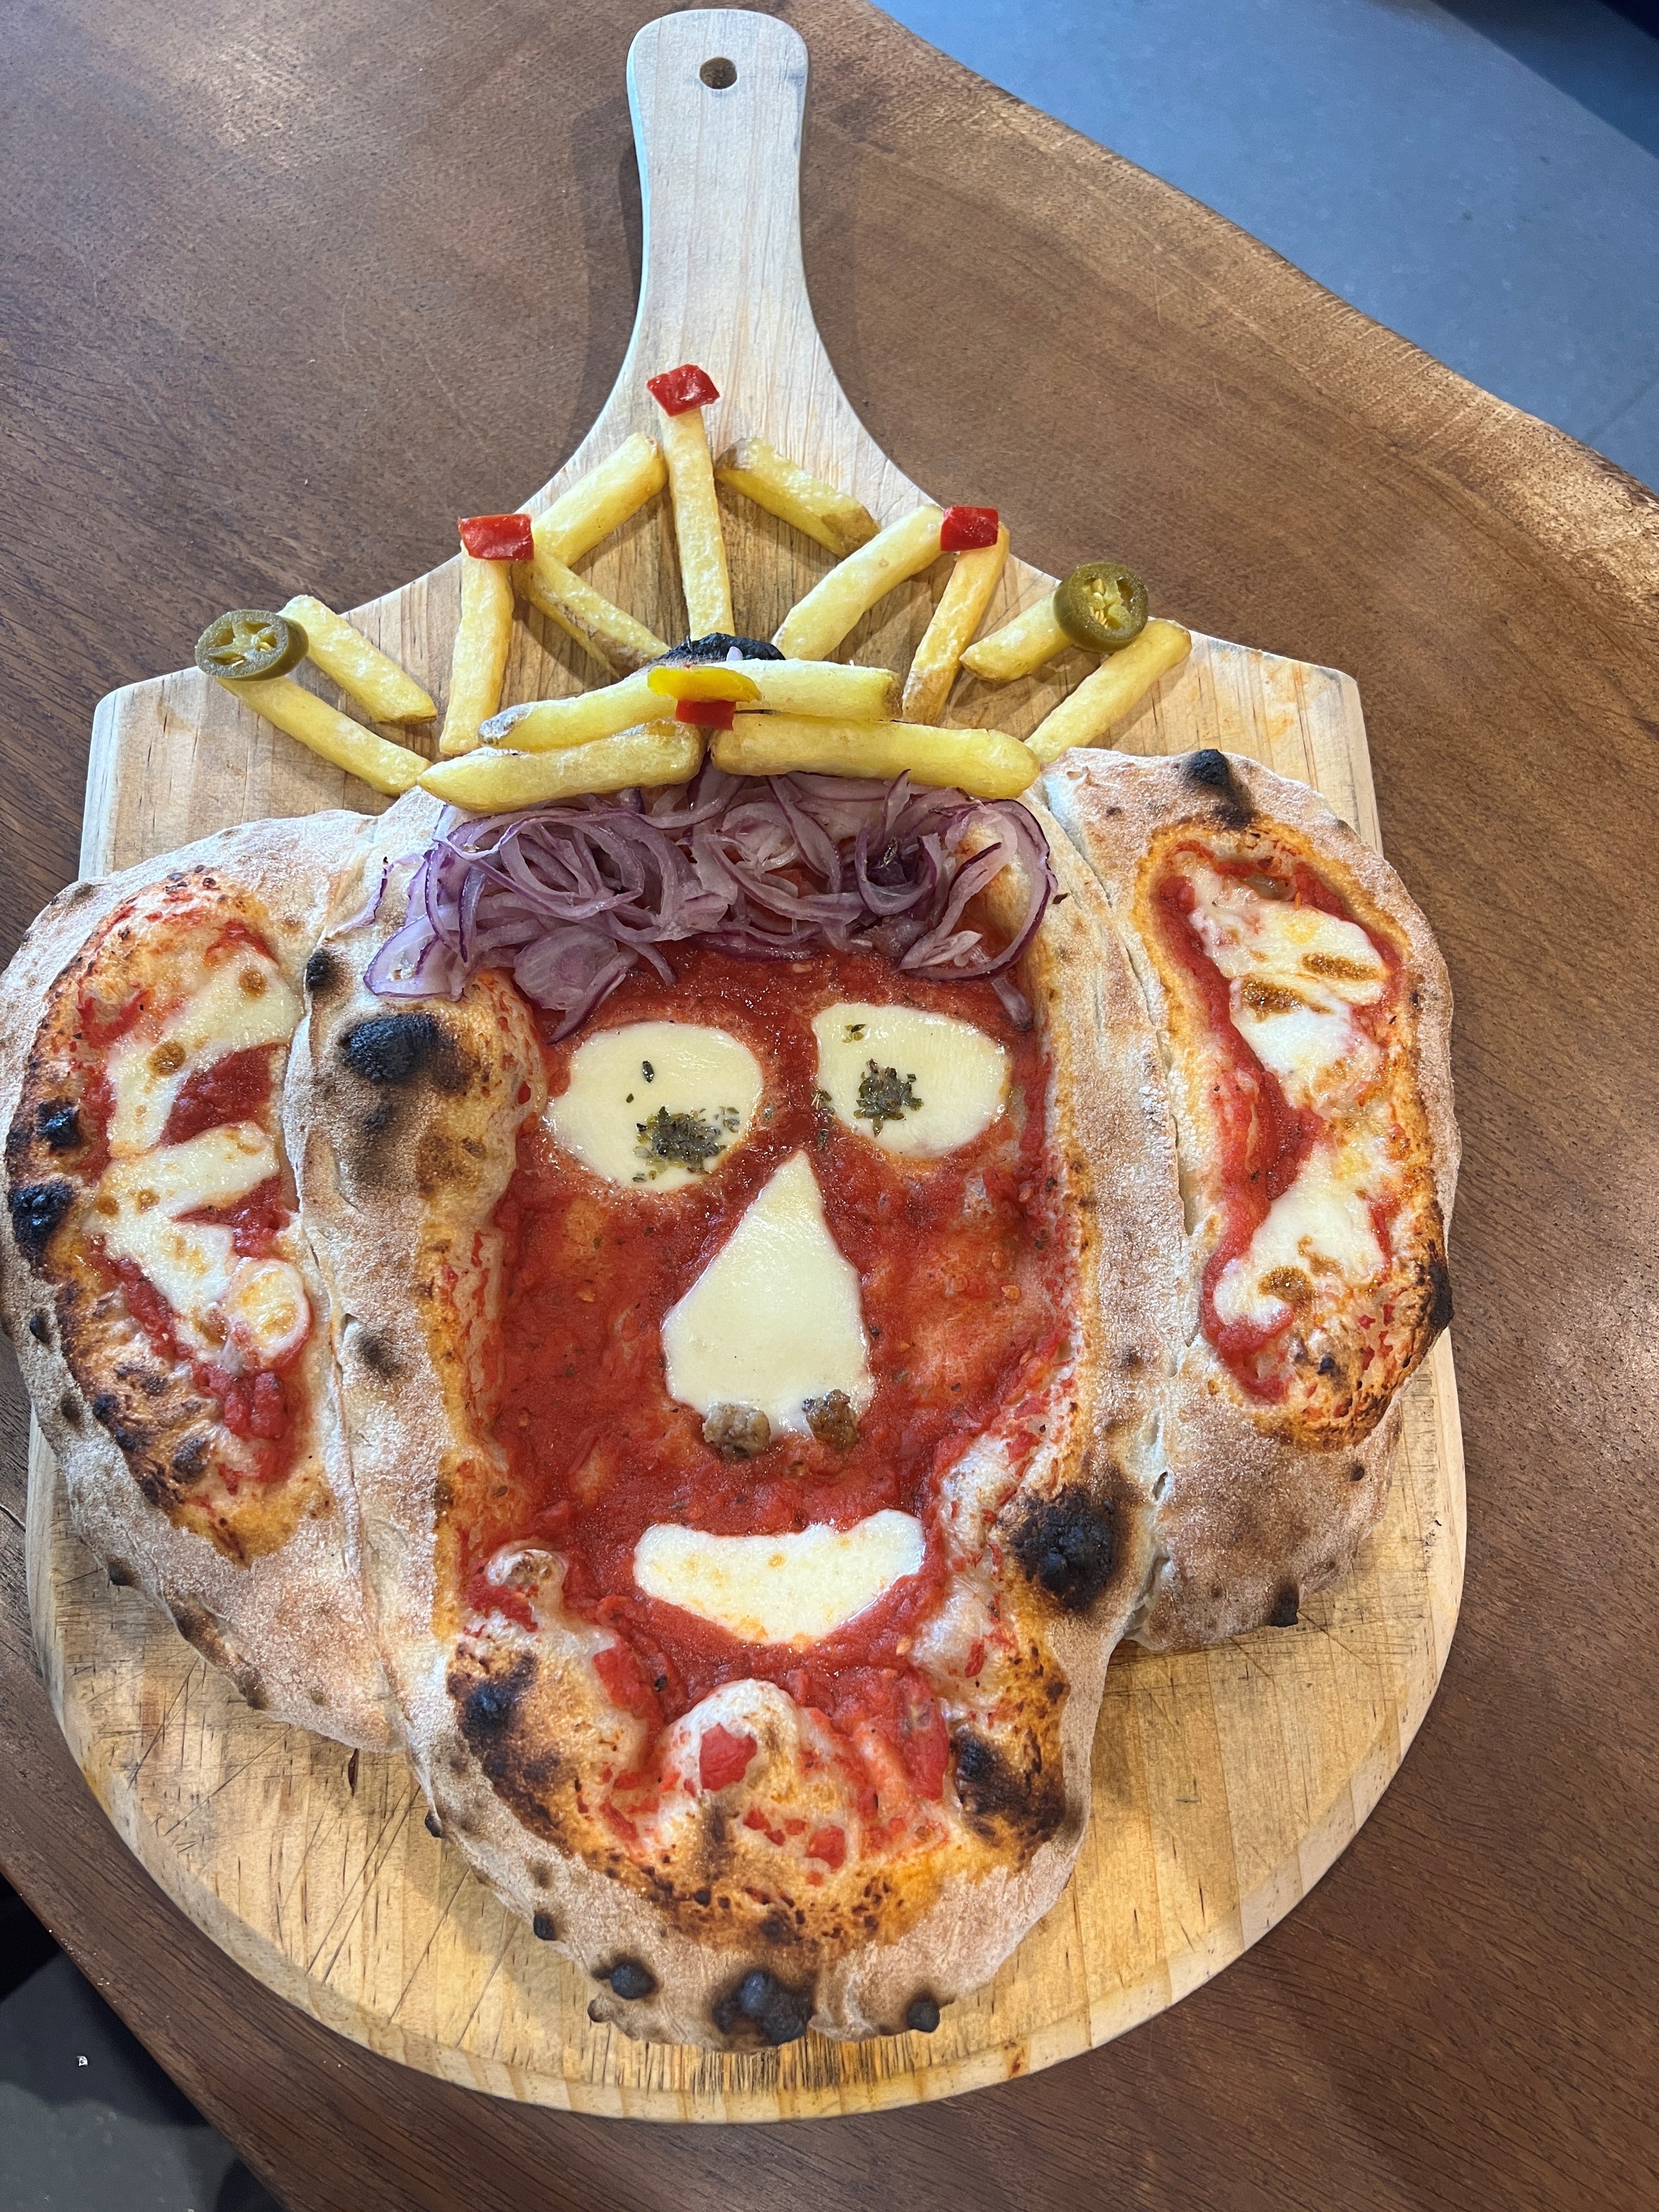 A tomato and mozzarella pizza in the shape of King Charles' head topped with a crown made out of chips, red peppers and jalapenos served on a wooden pizza board